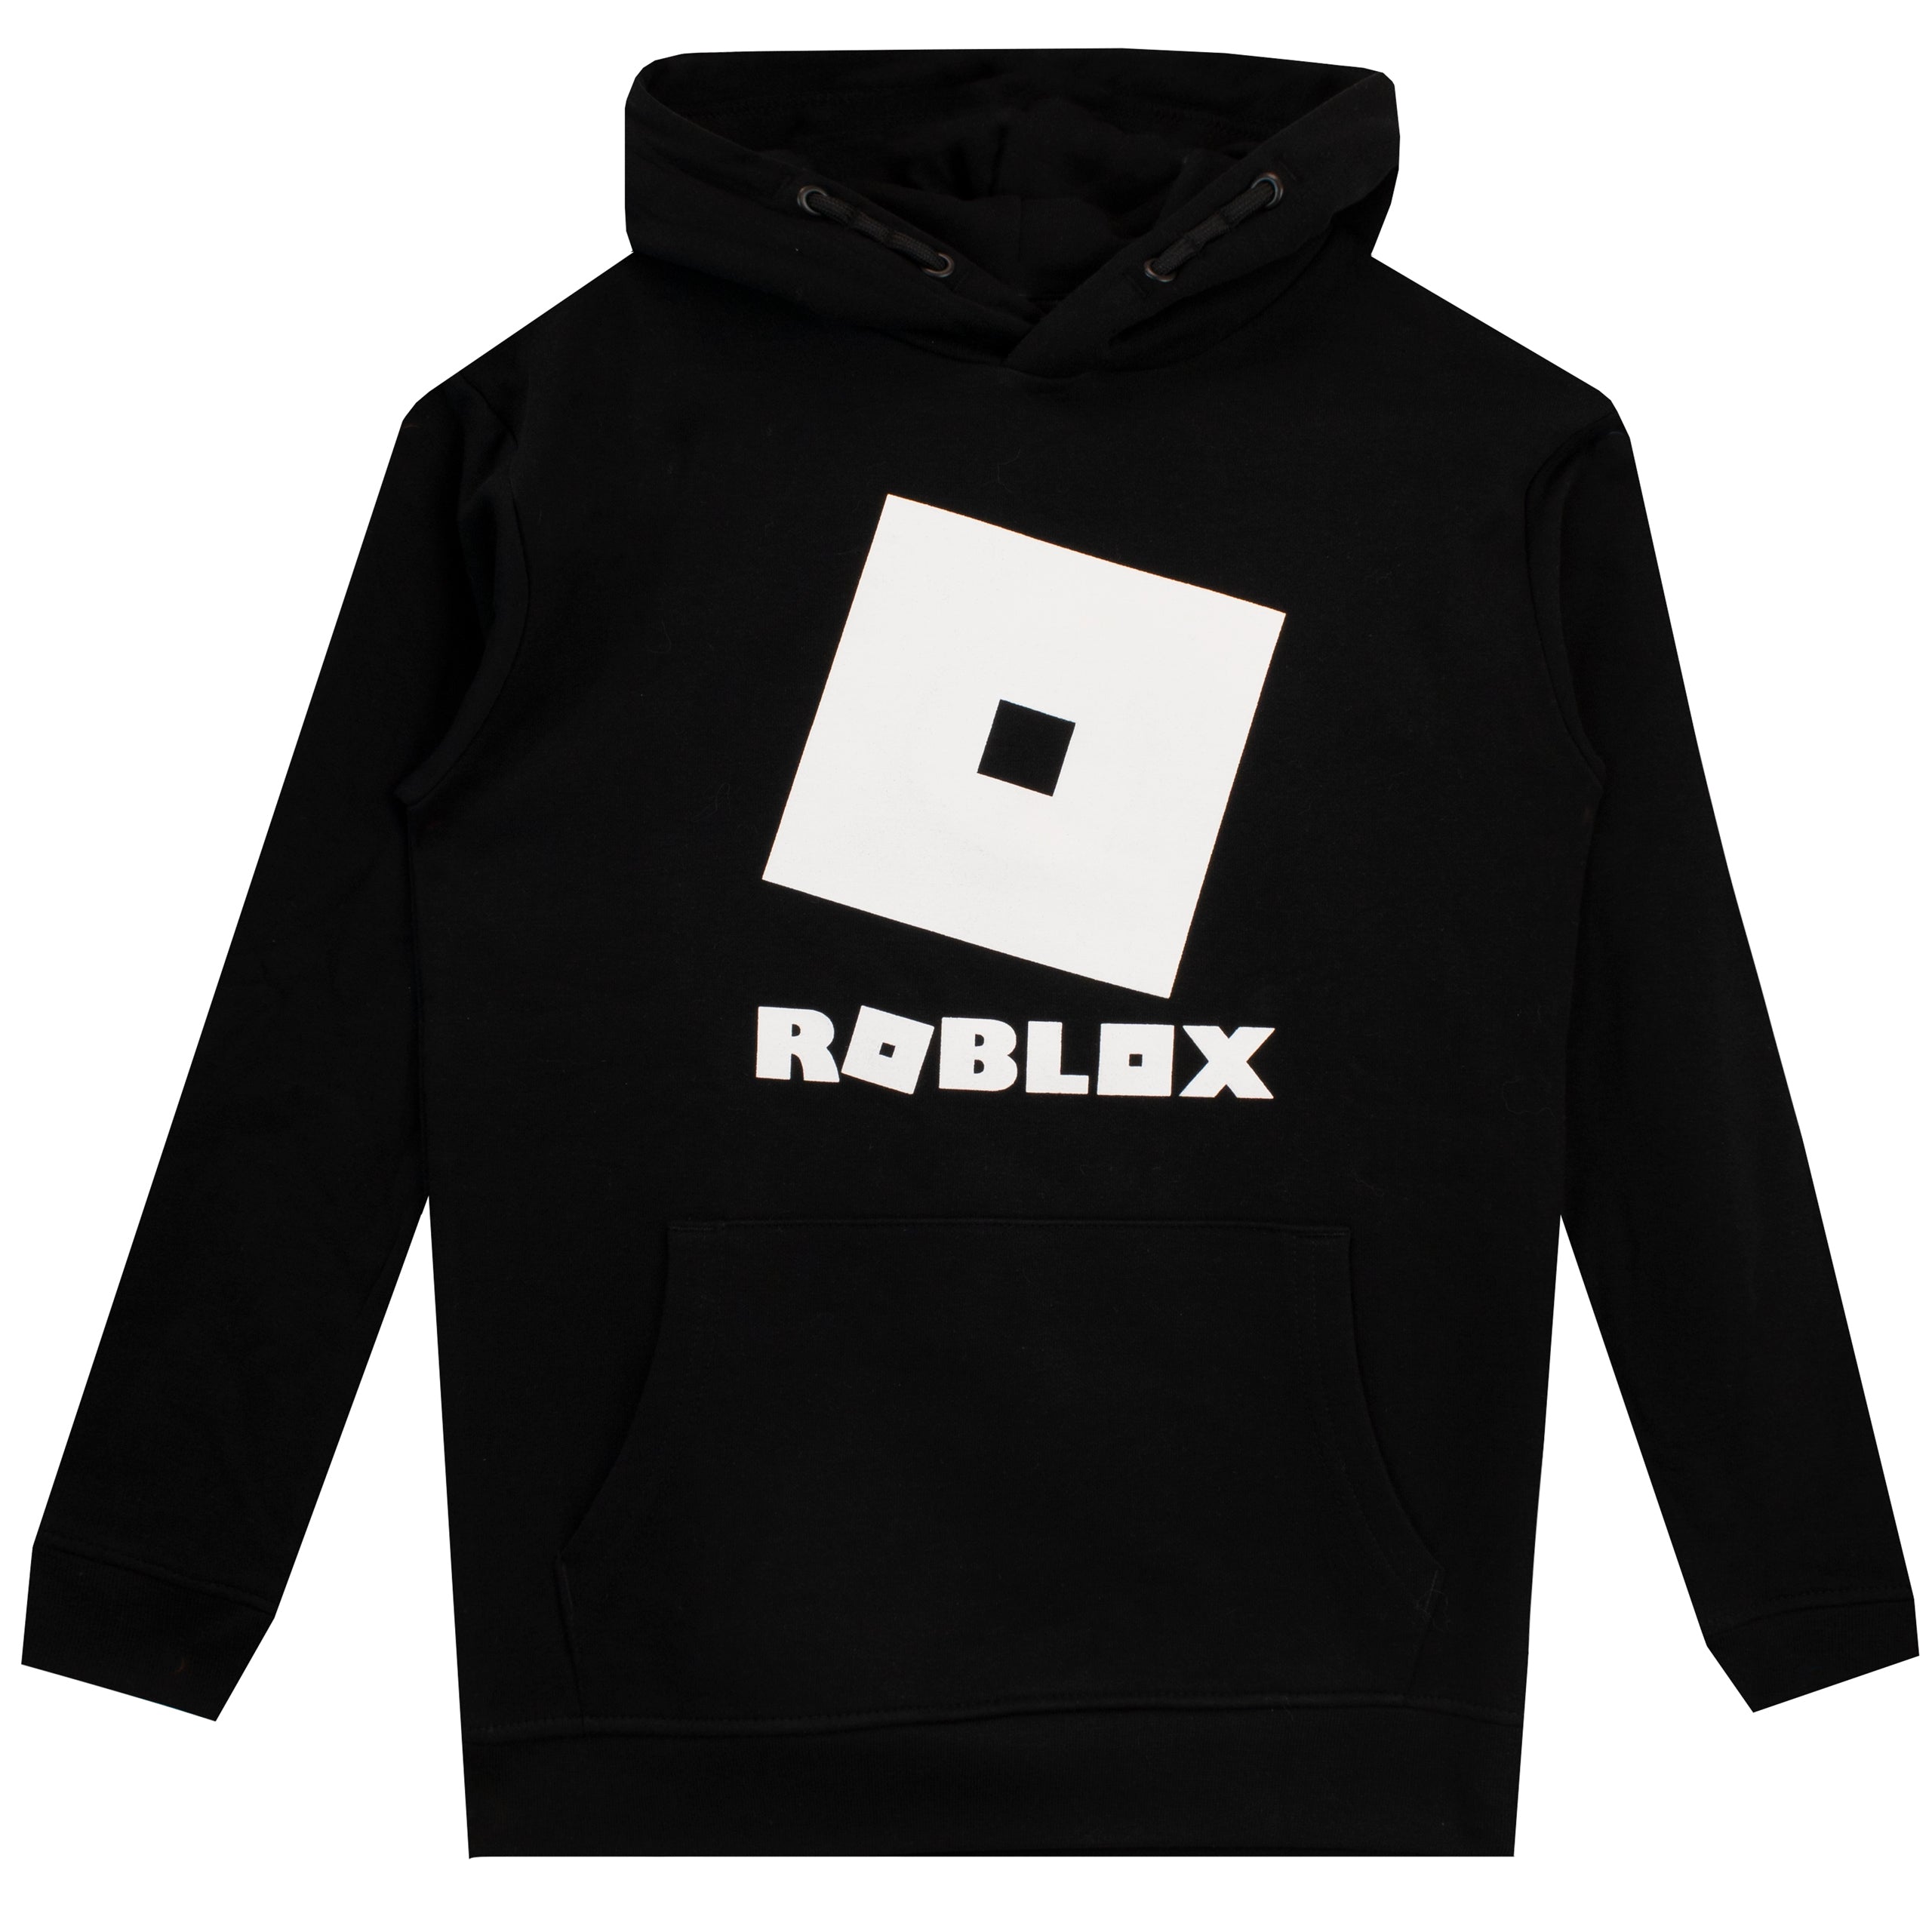 Buy Roblox T Shirt And Pants online